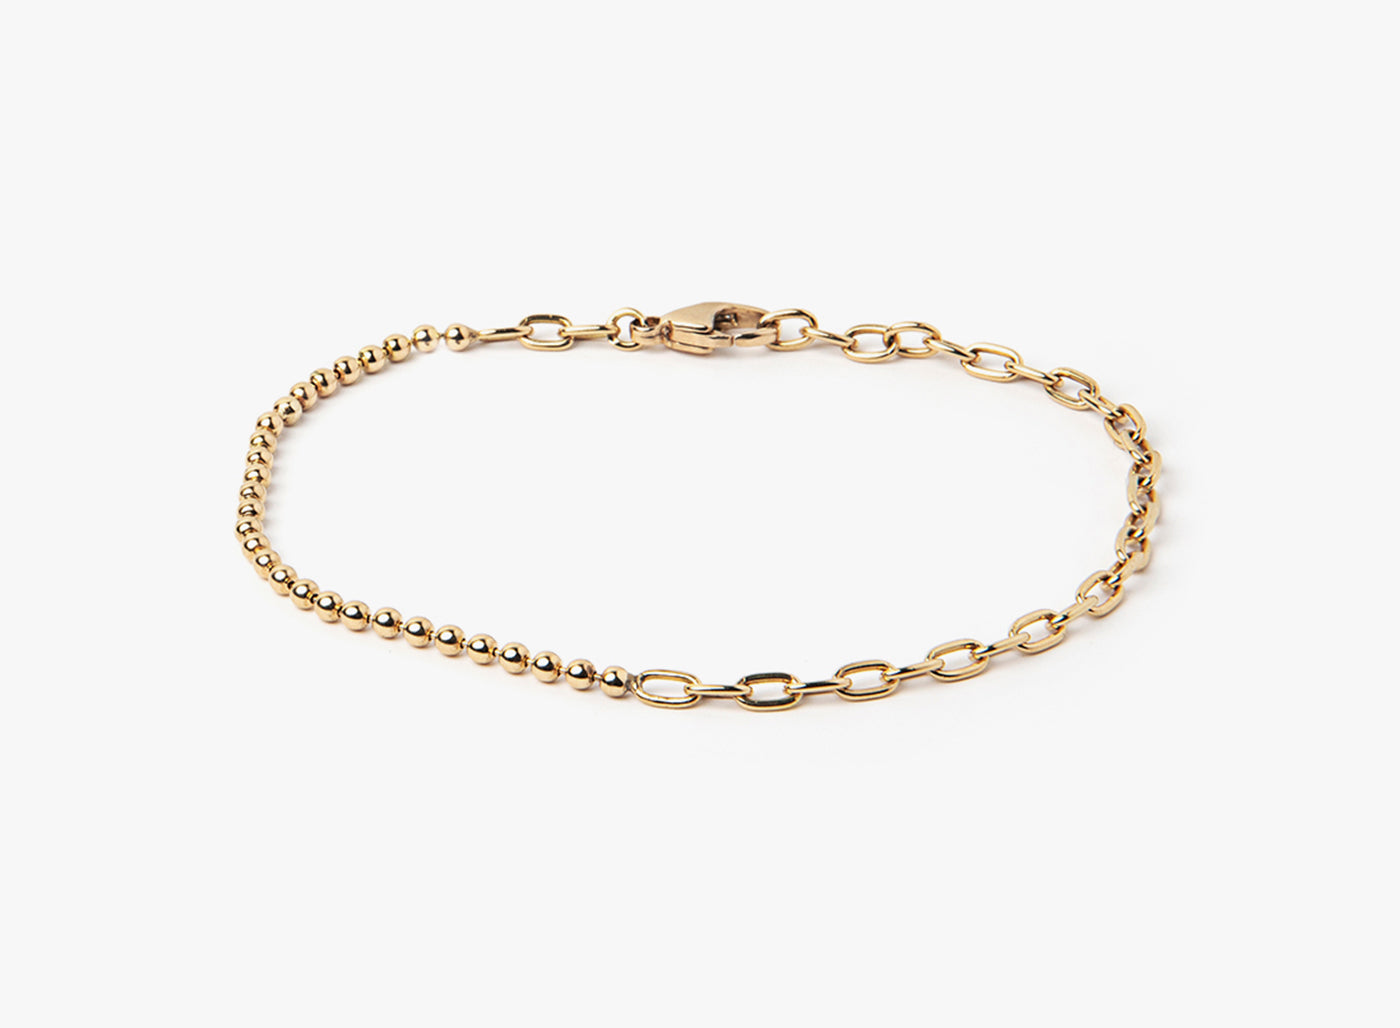 18K SOLID YELLOW GOLD BRACELET 239: an 18K gold ball chain connects to 18K gold oval cable links